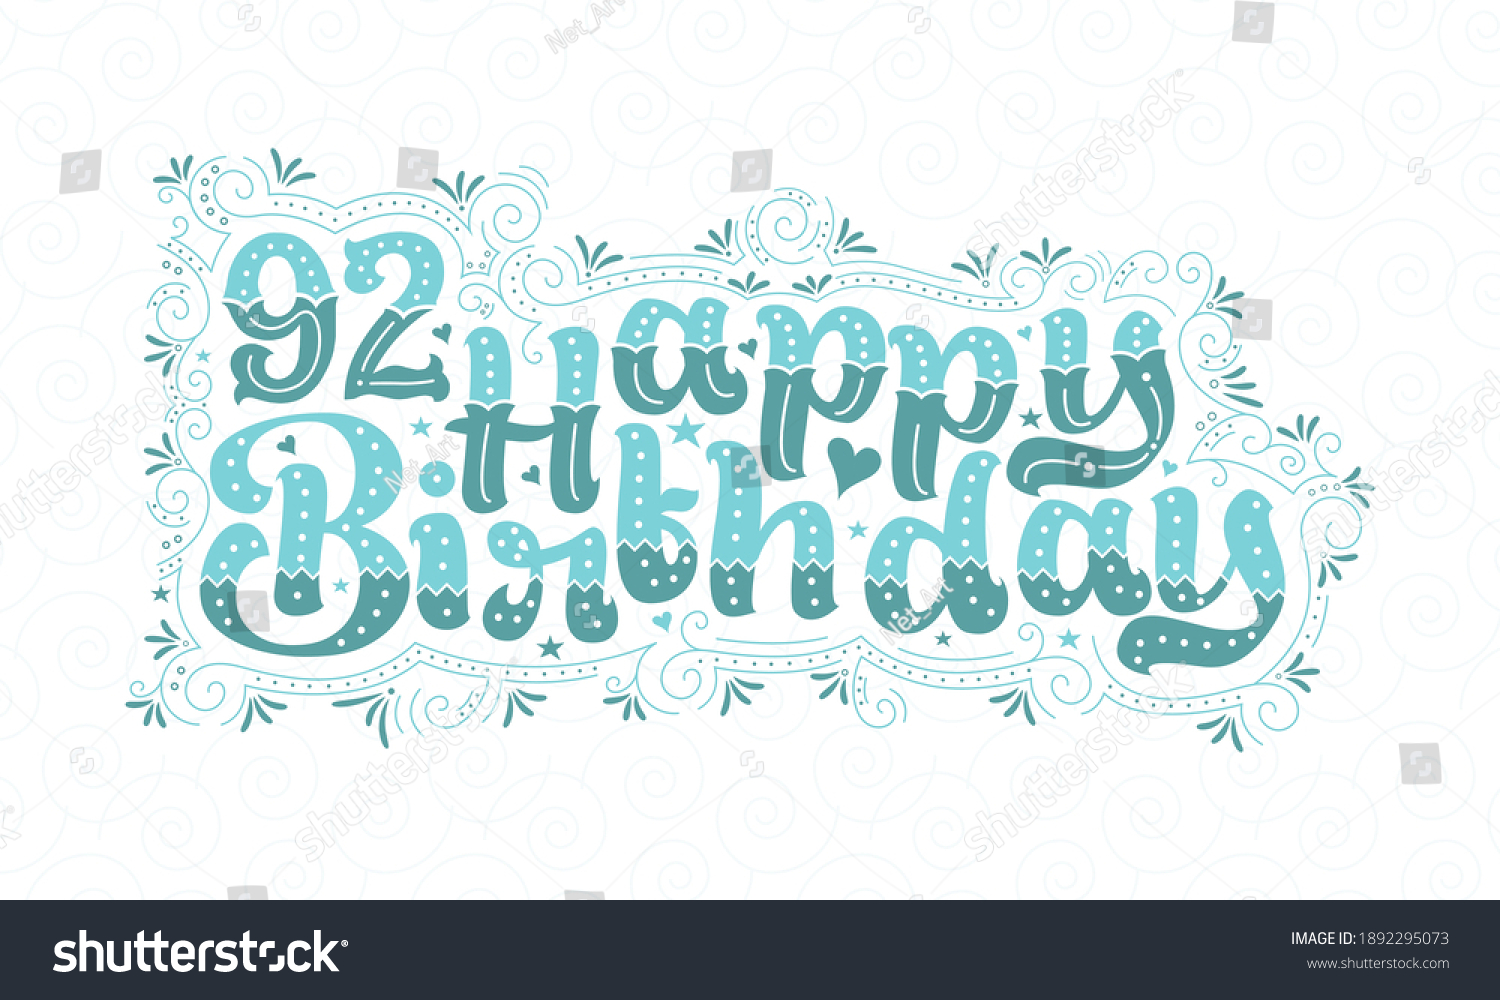 92nd Happy Birthday Lettering 92 Years Stock Vector (Royalty Free ...